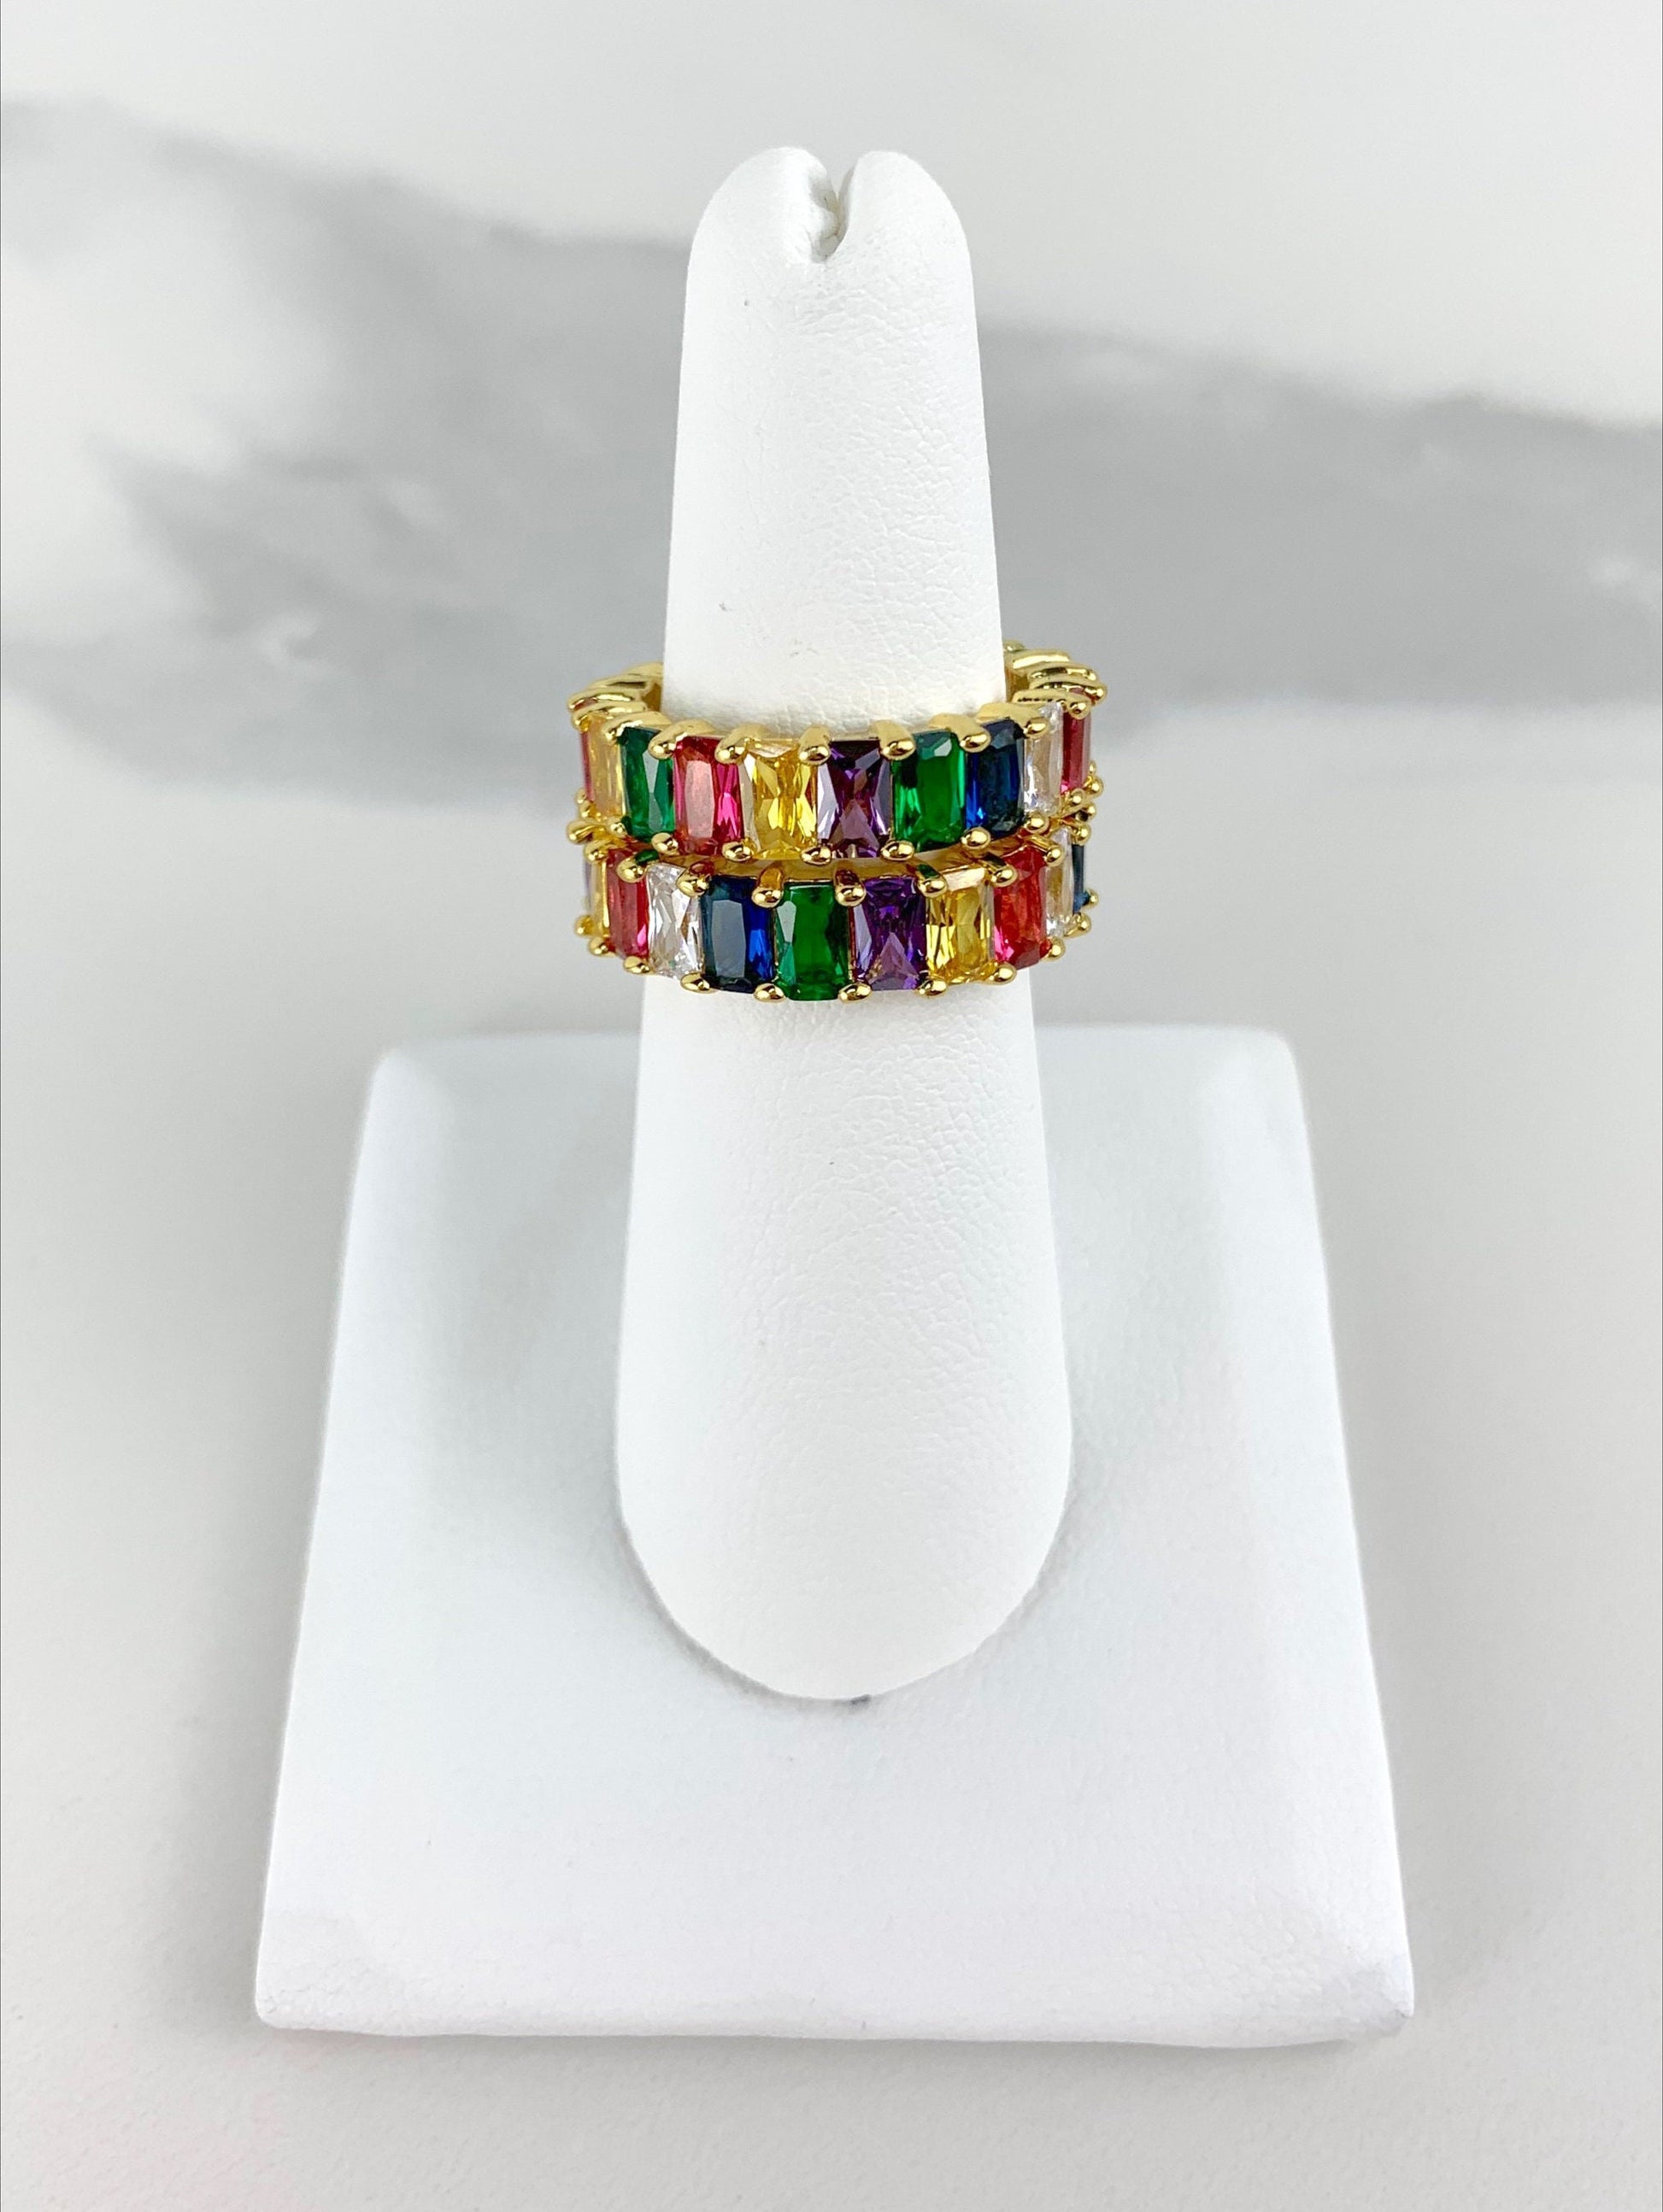 18k Gold Filled Cubic Zirconia Rainbow Ring Featuring Baguette Settings For Wholesale and Jewelry Supplies